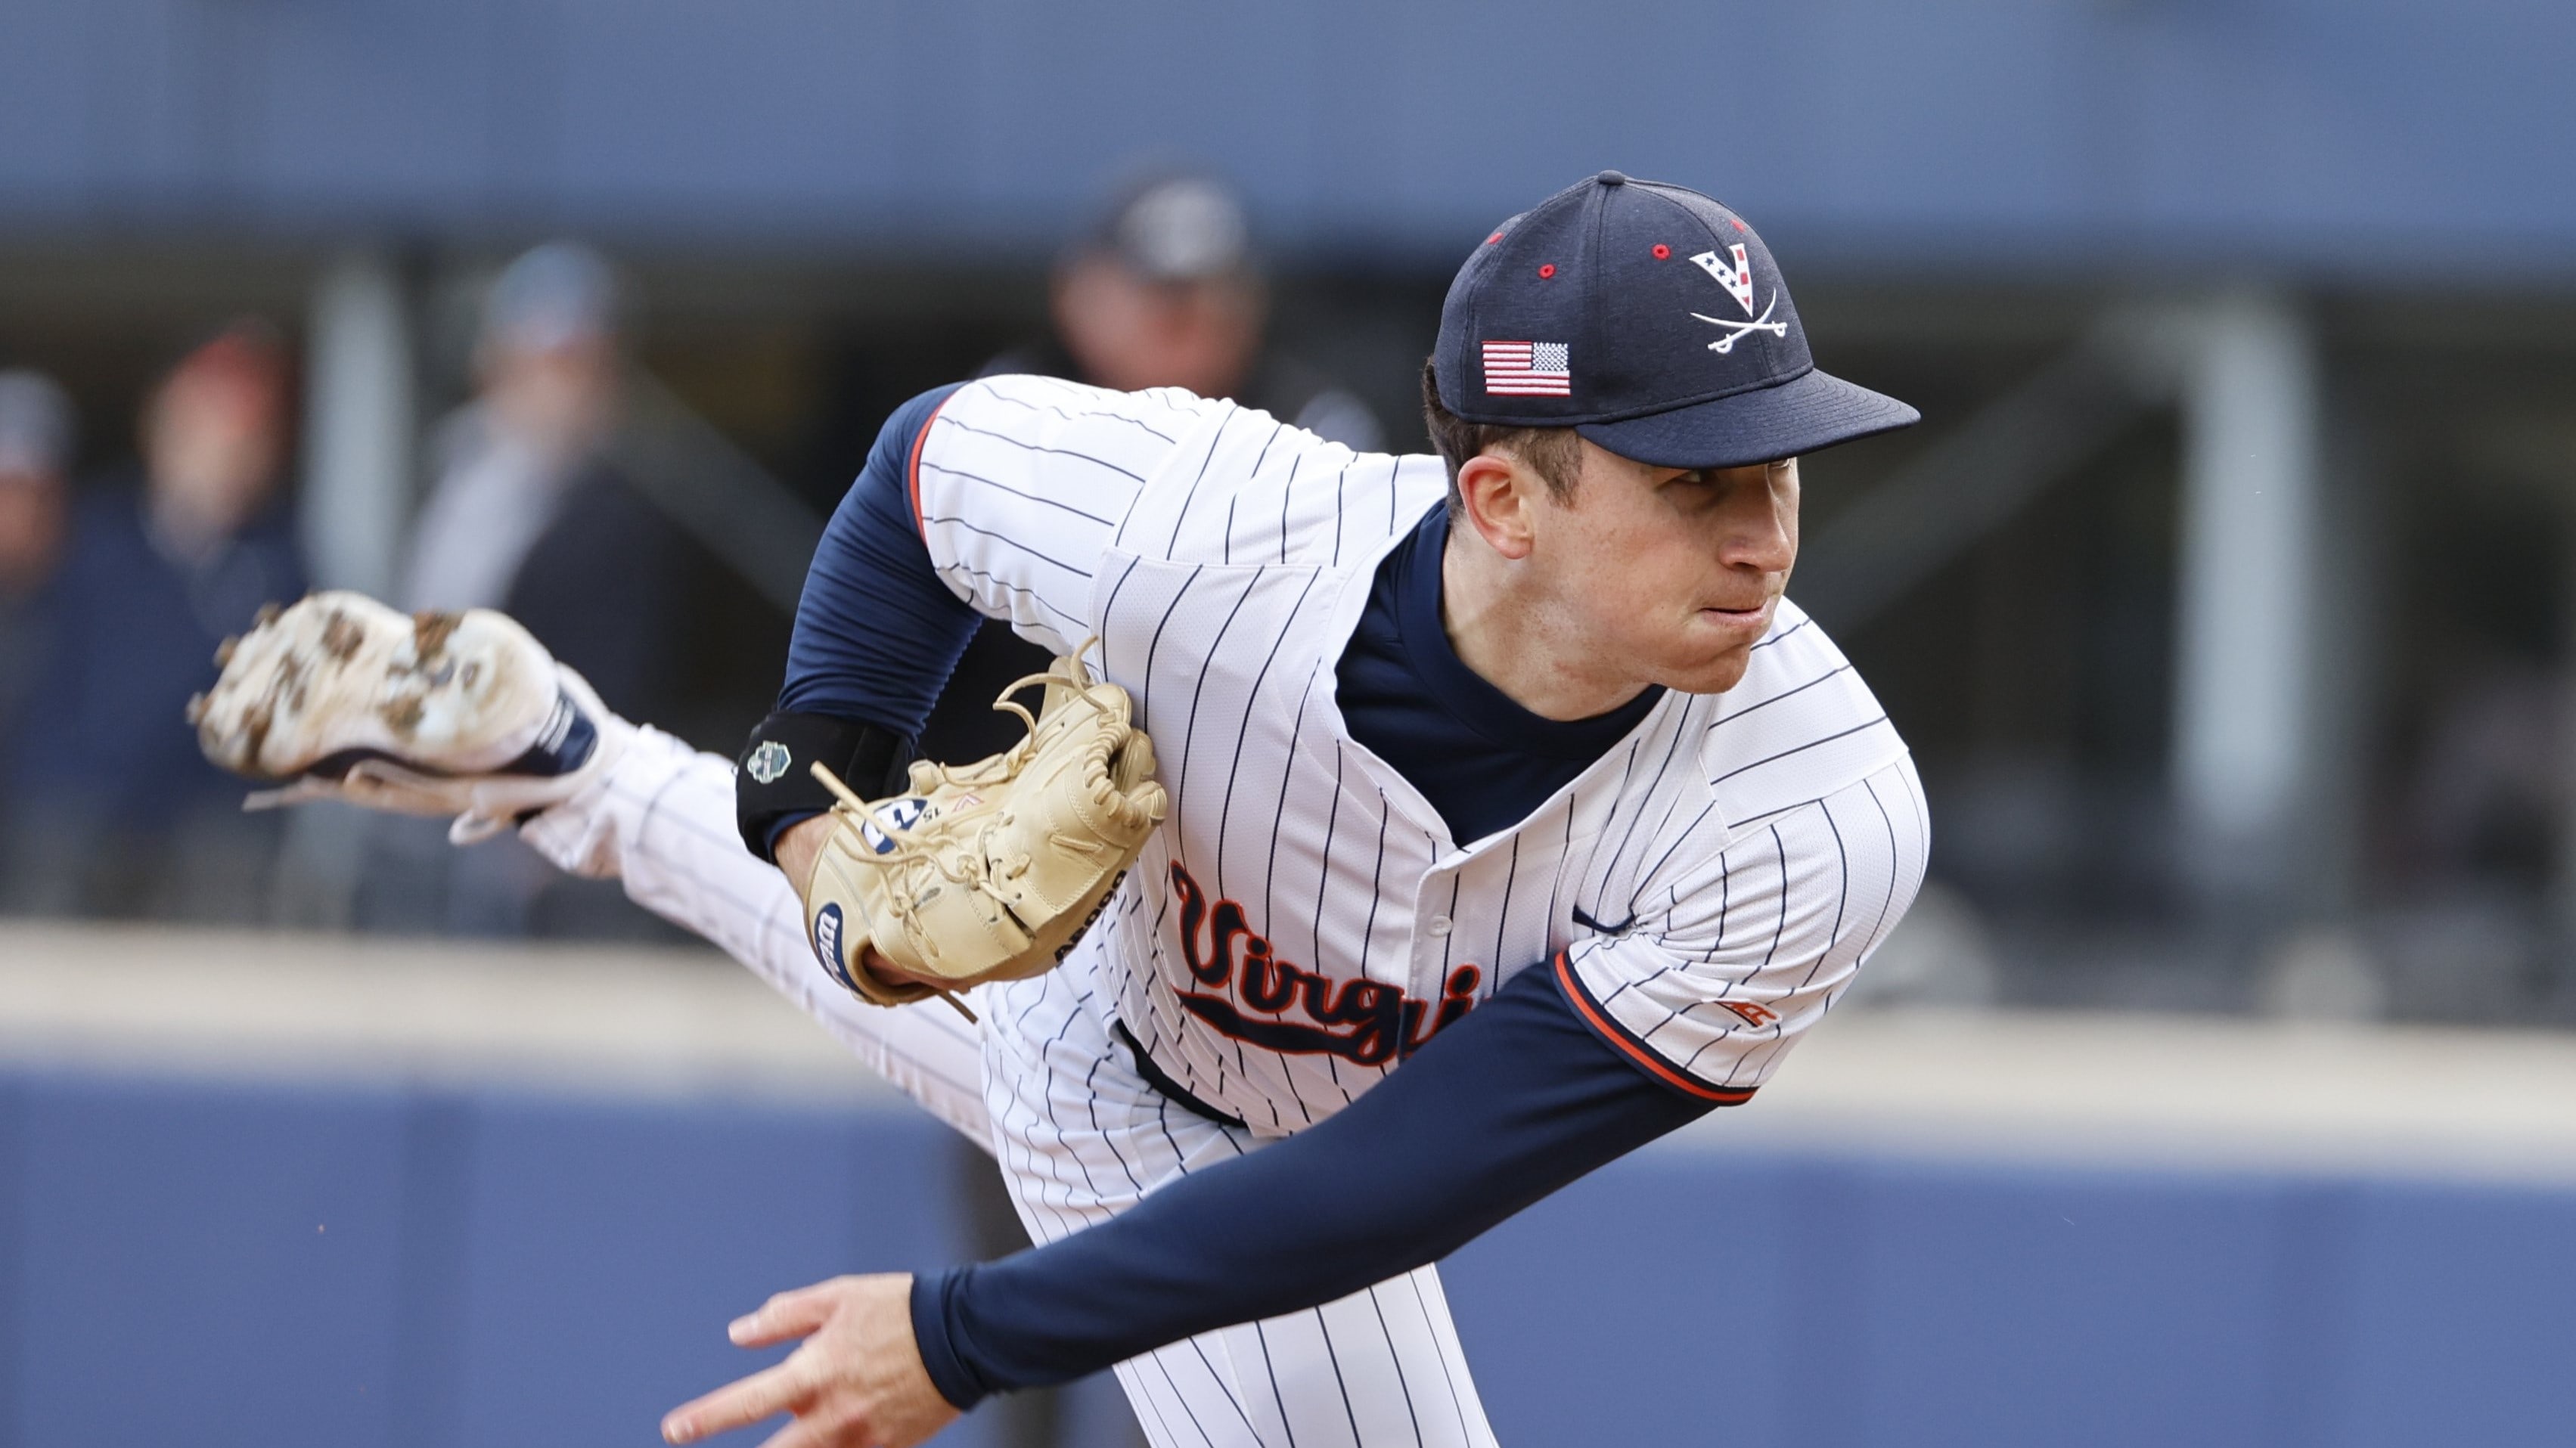 Evan Blanco delivers a pitch during the Virginia baseball game against North Carolina at Disharoon Park.